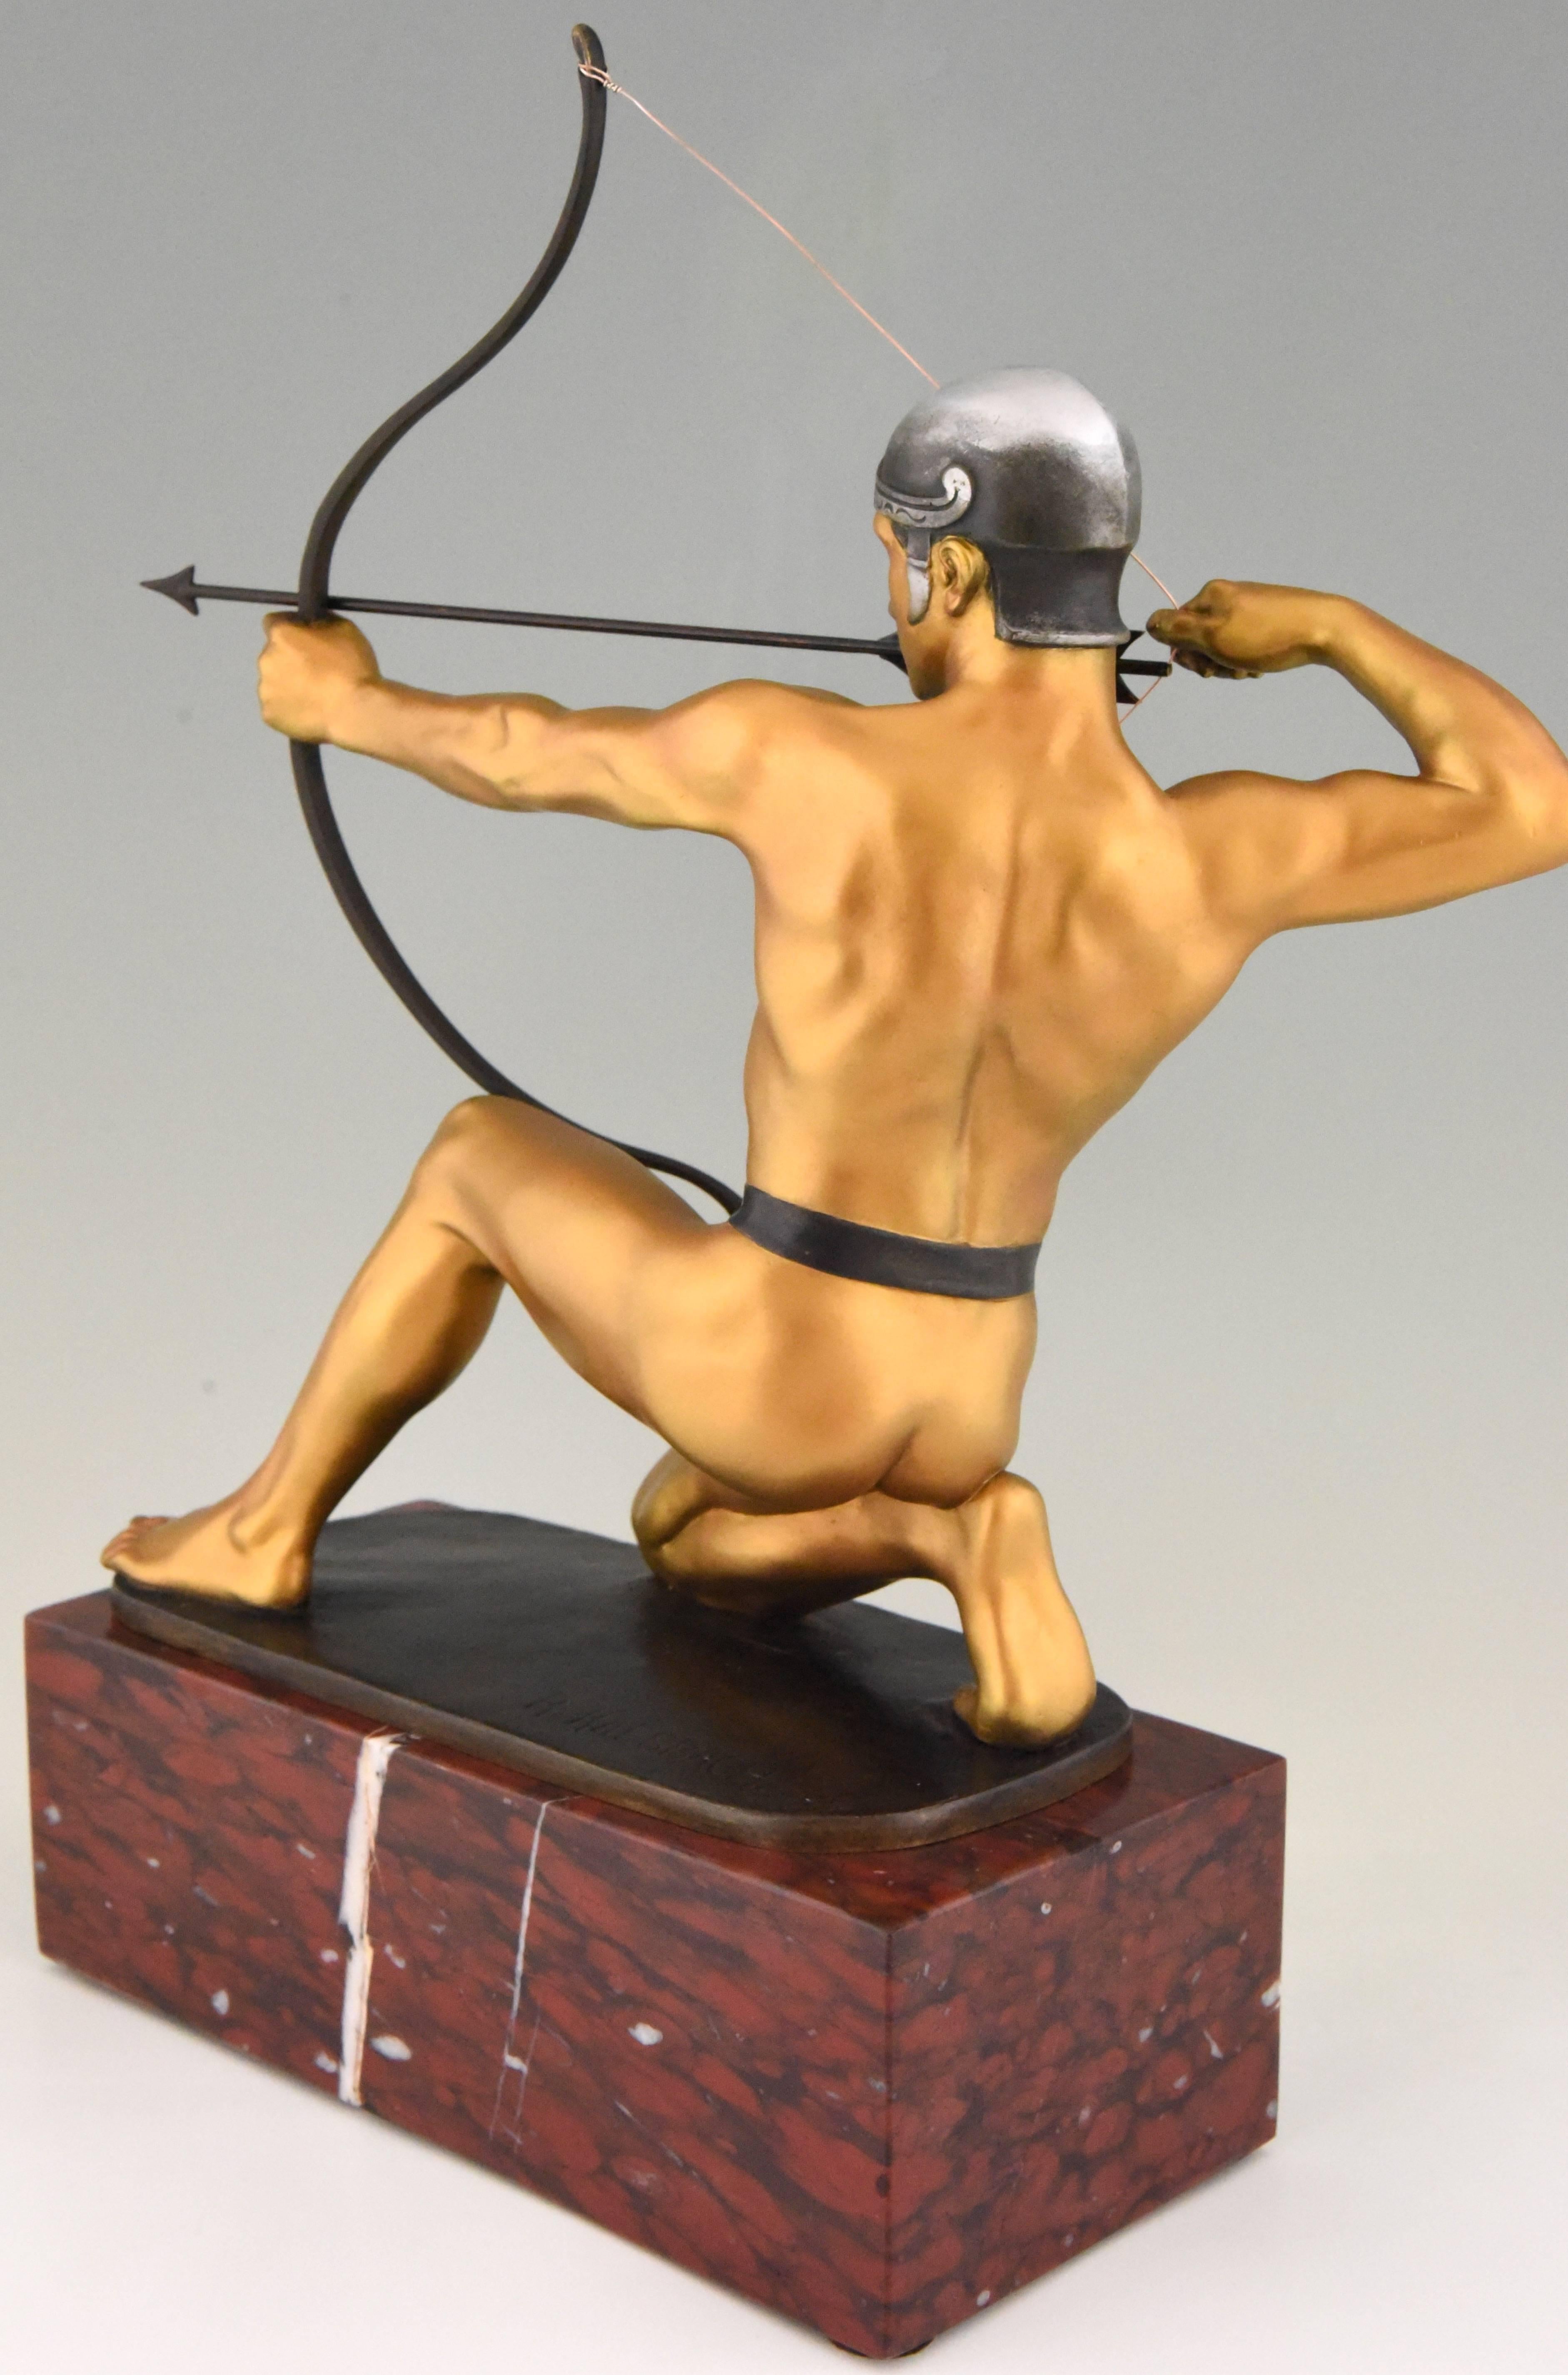 20th Century Antique Bronze Sculpture of a Male Nude Archer by Rudolf Kaesbach  1900